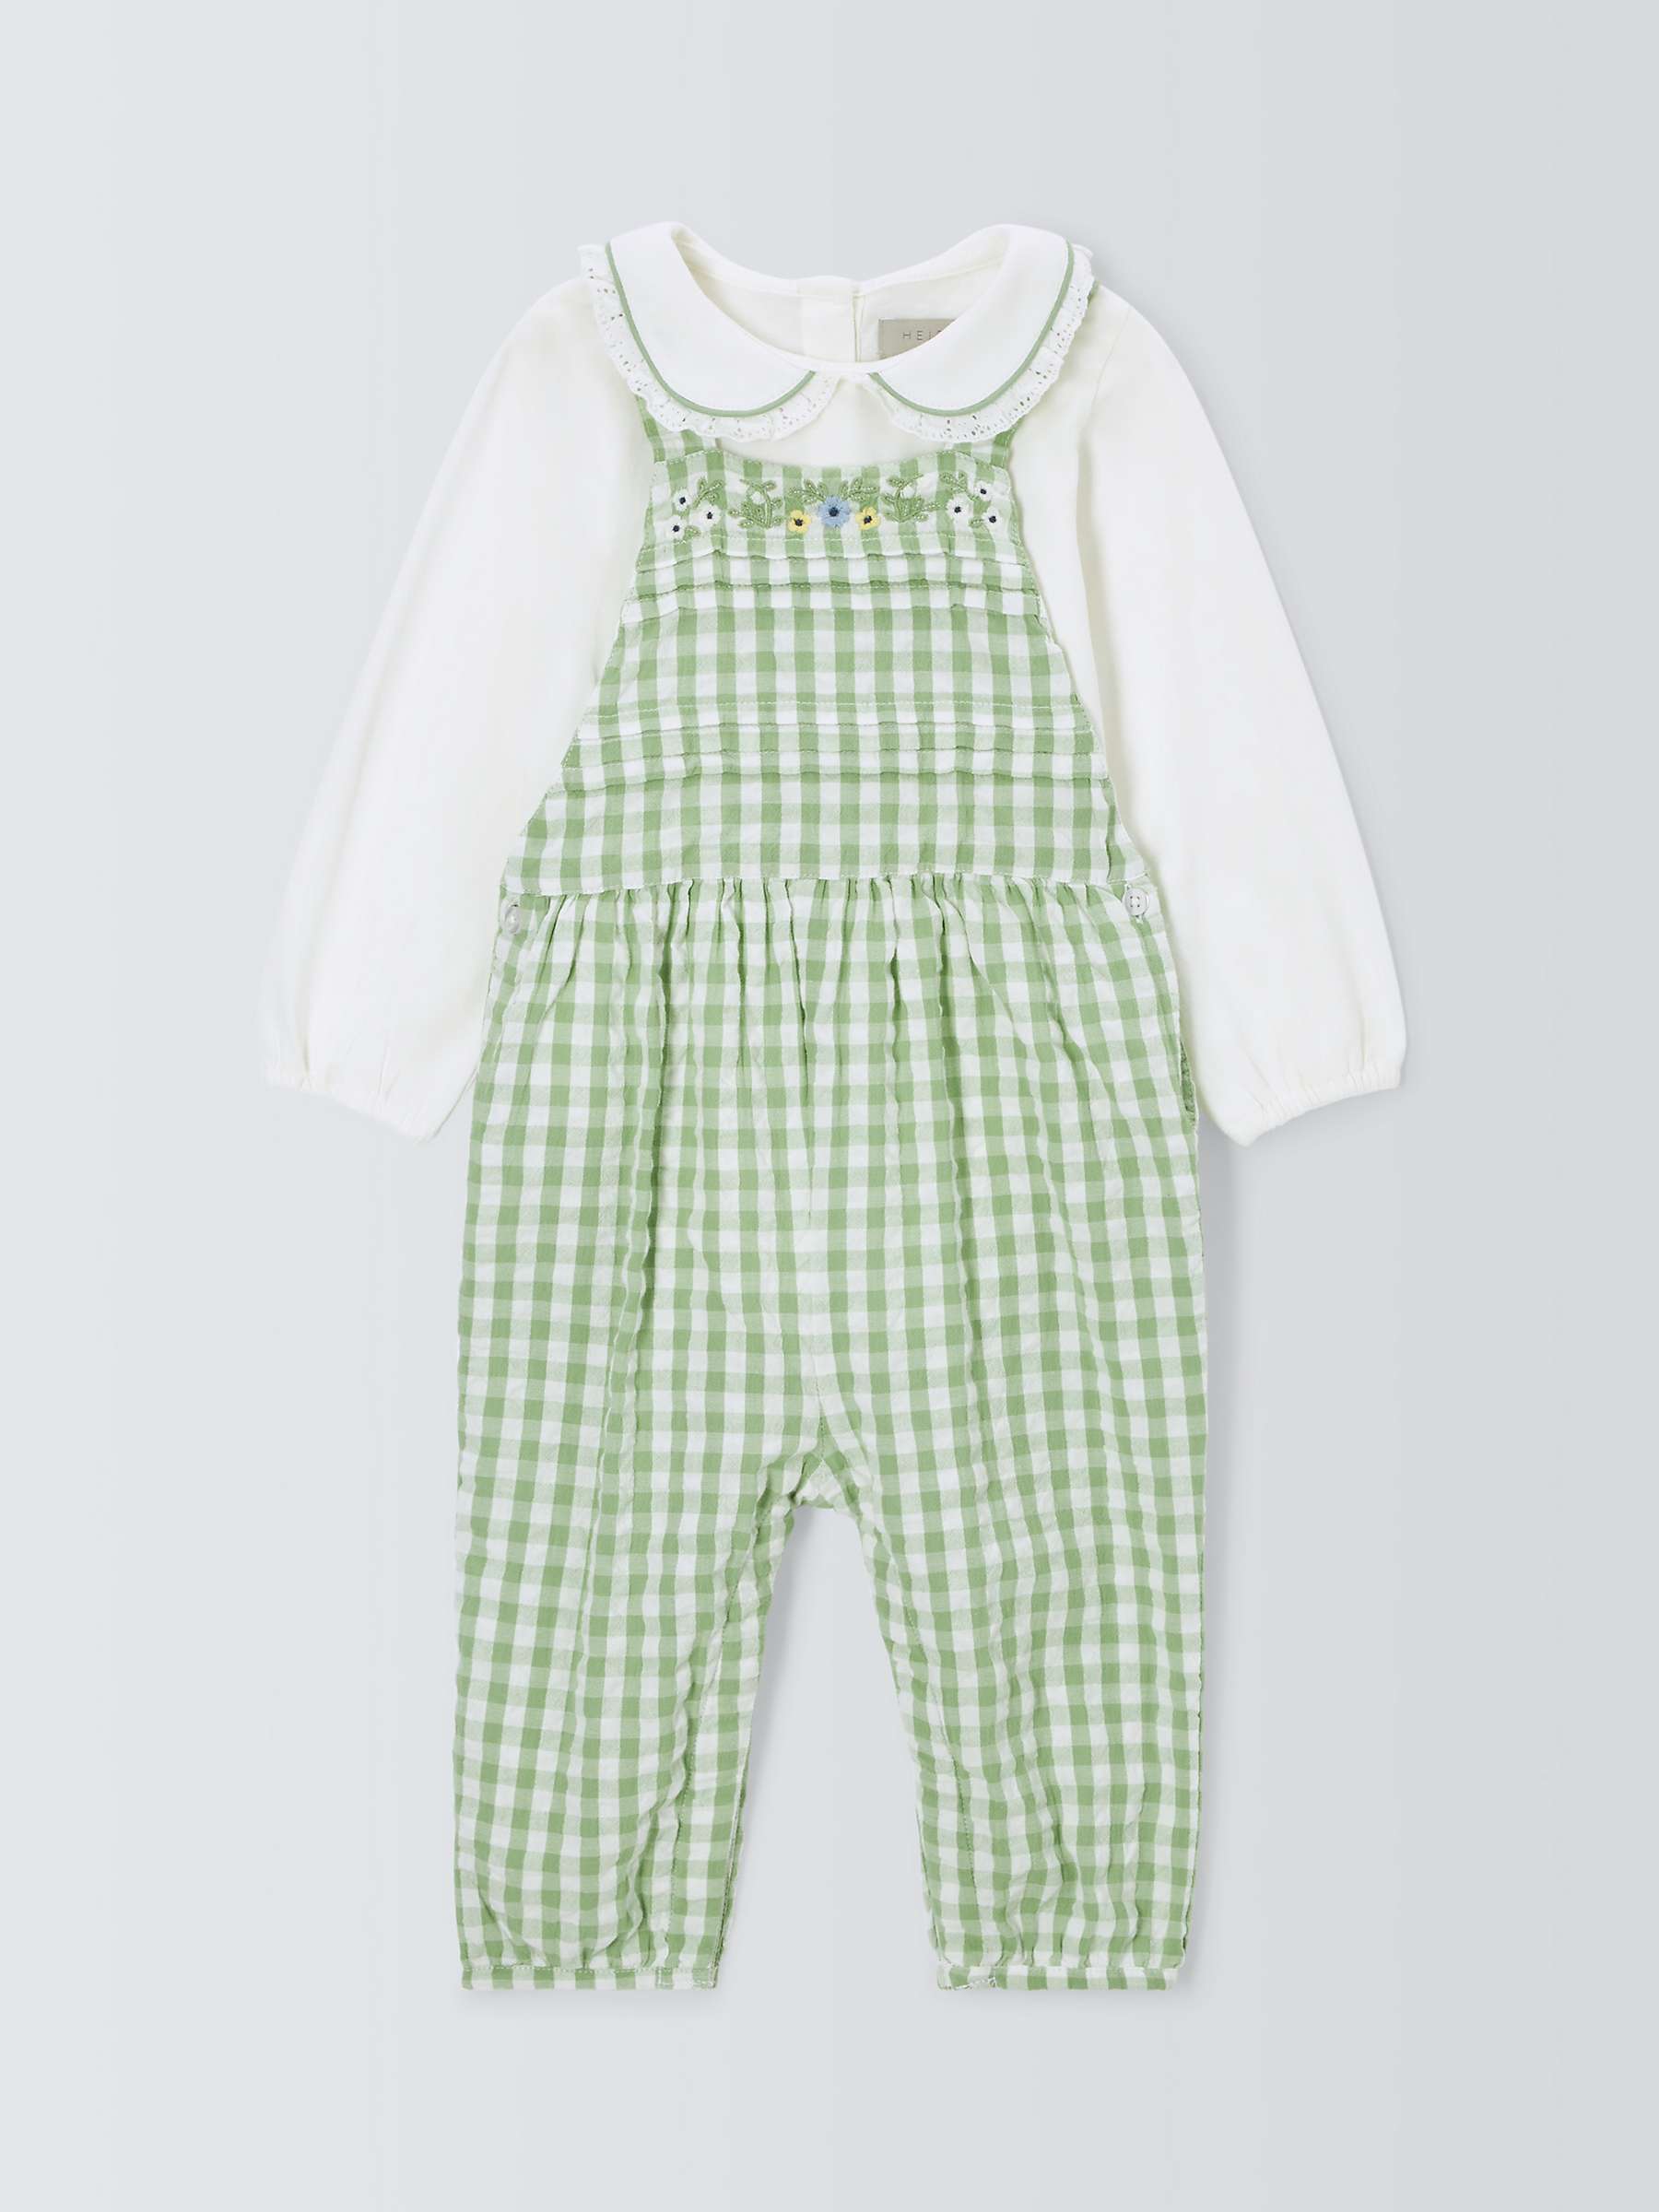 Buy John Lewis Heirloom Collection Baby Blouse & Embroidered Gingham Dungarees Online at johnlewis.com